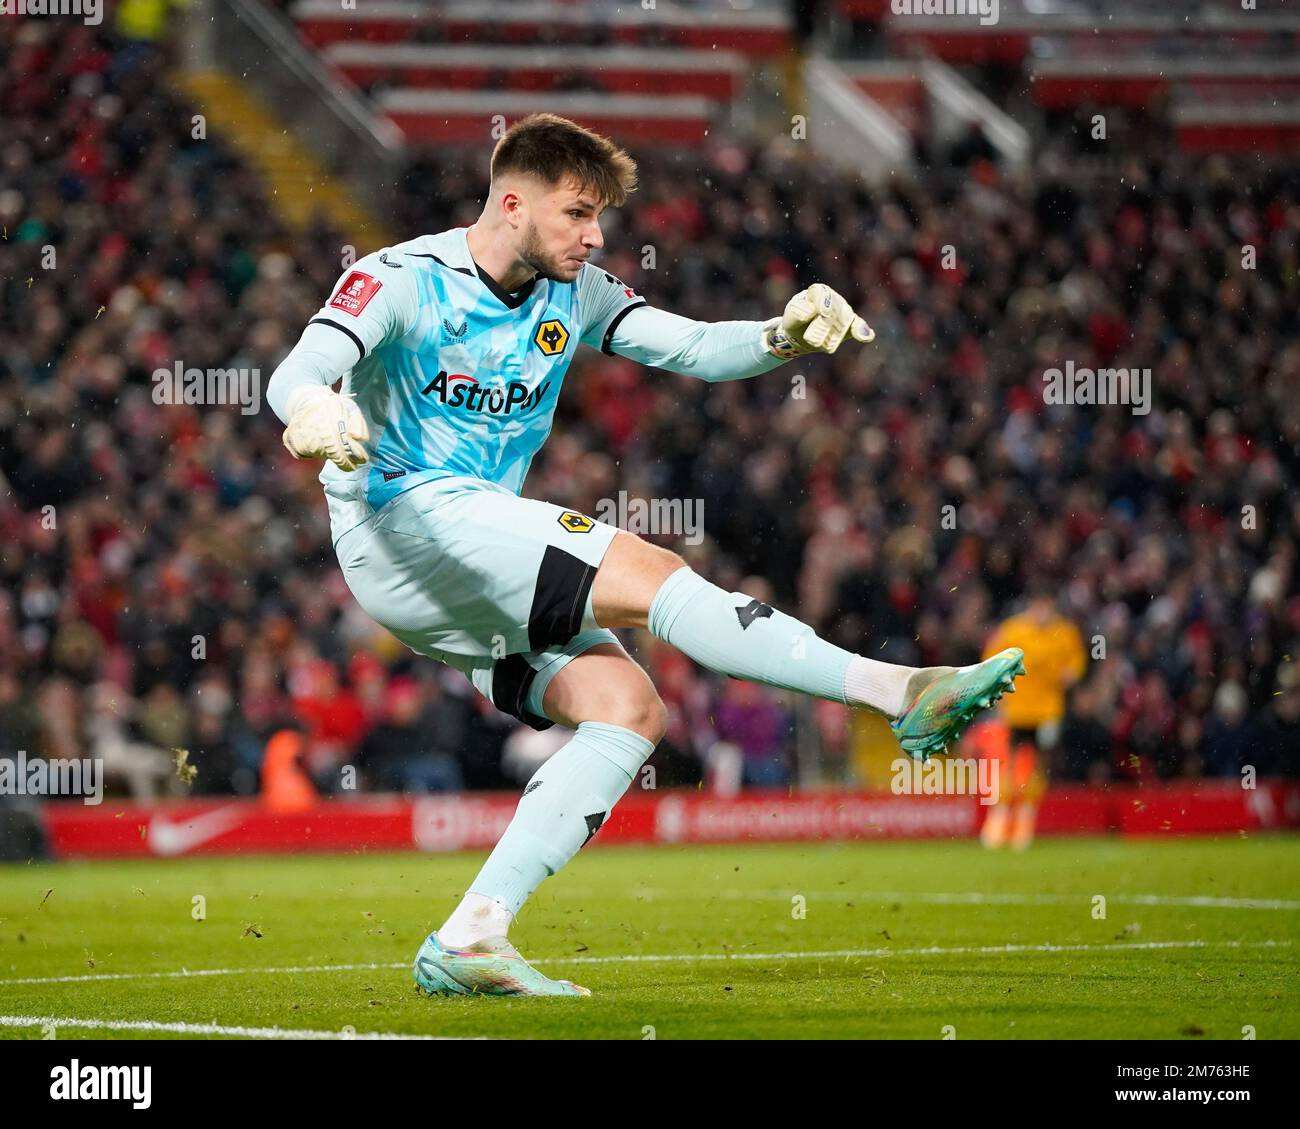 Matija Šarkić #13 of Wolverhampton Wanderers clears upfield during the Emirates FA Cup Third Round match Liverpool vs Wolverhampton Wanderers at Anfield, Liverpool, United Kingdom, 7th January 2023  (Photo by Steve Flynn/News Images) Stock Photo